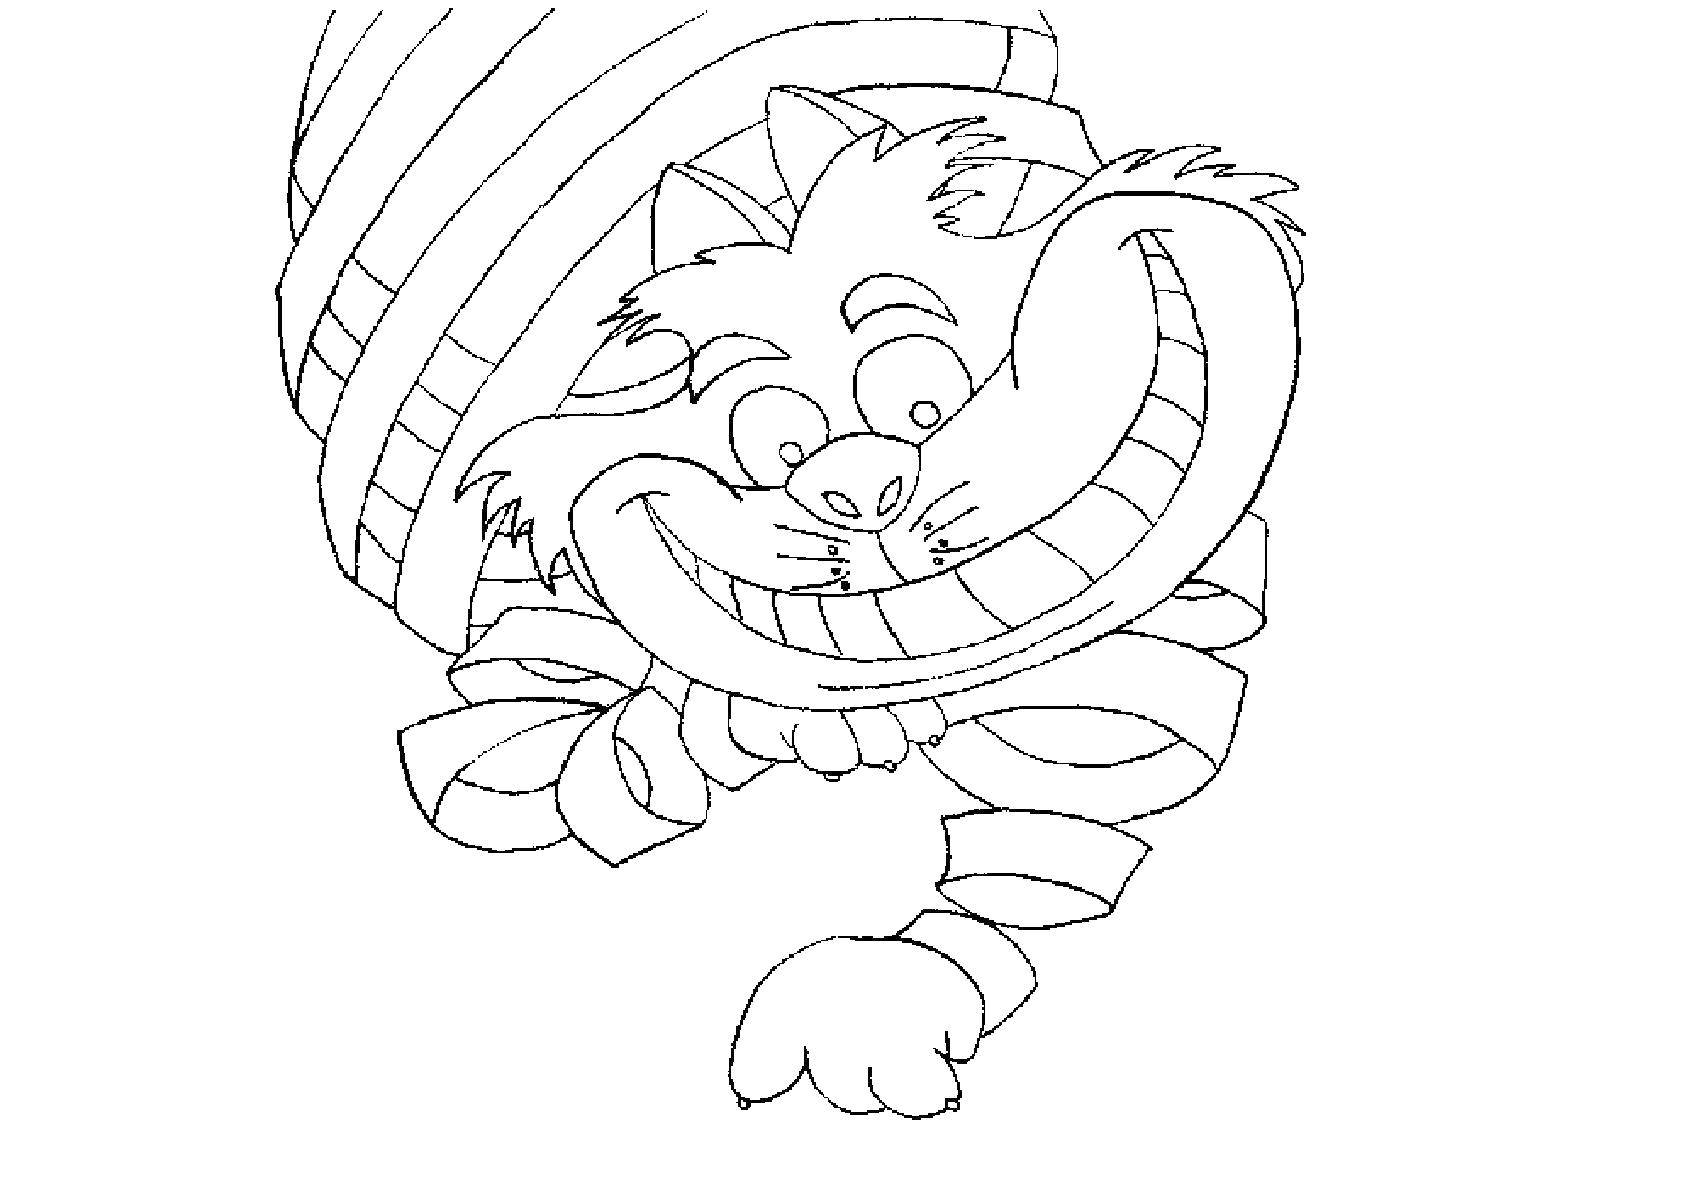 Coloring The smile of the Cheshire cat. Category Fairy tales. Tags:  tales, the Cheshire cat.